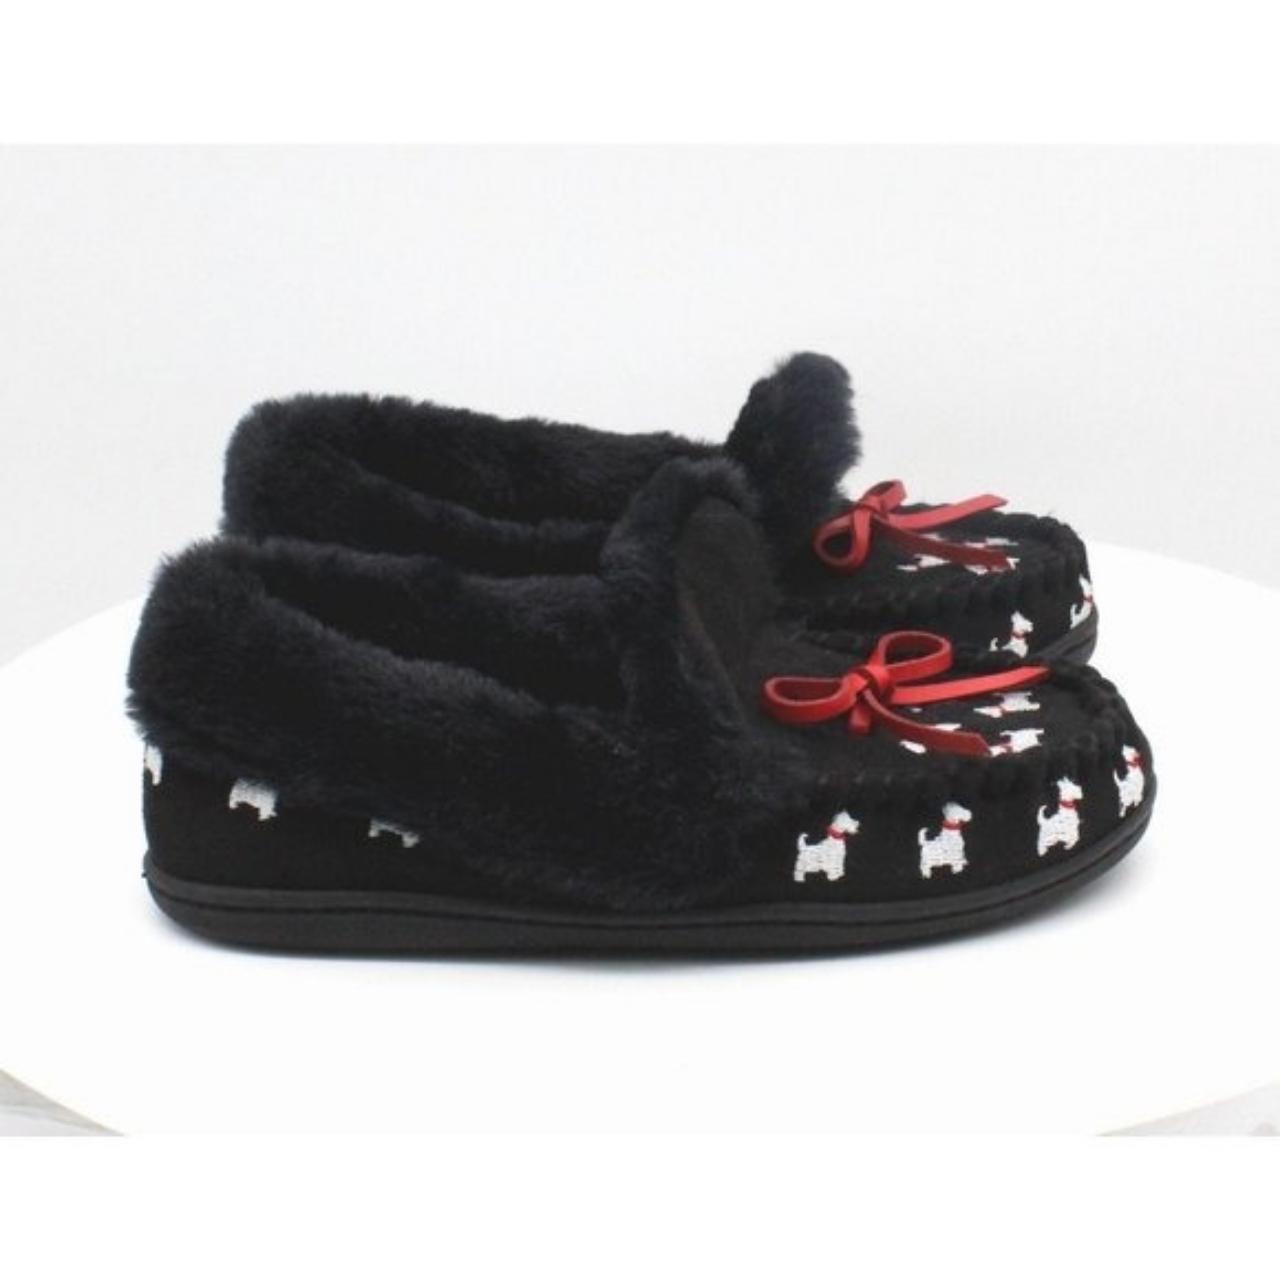 Product Image 2 - Charter Club Dorenda Moccasin Slippers

Help